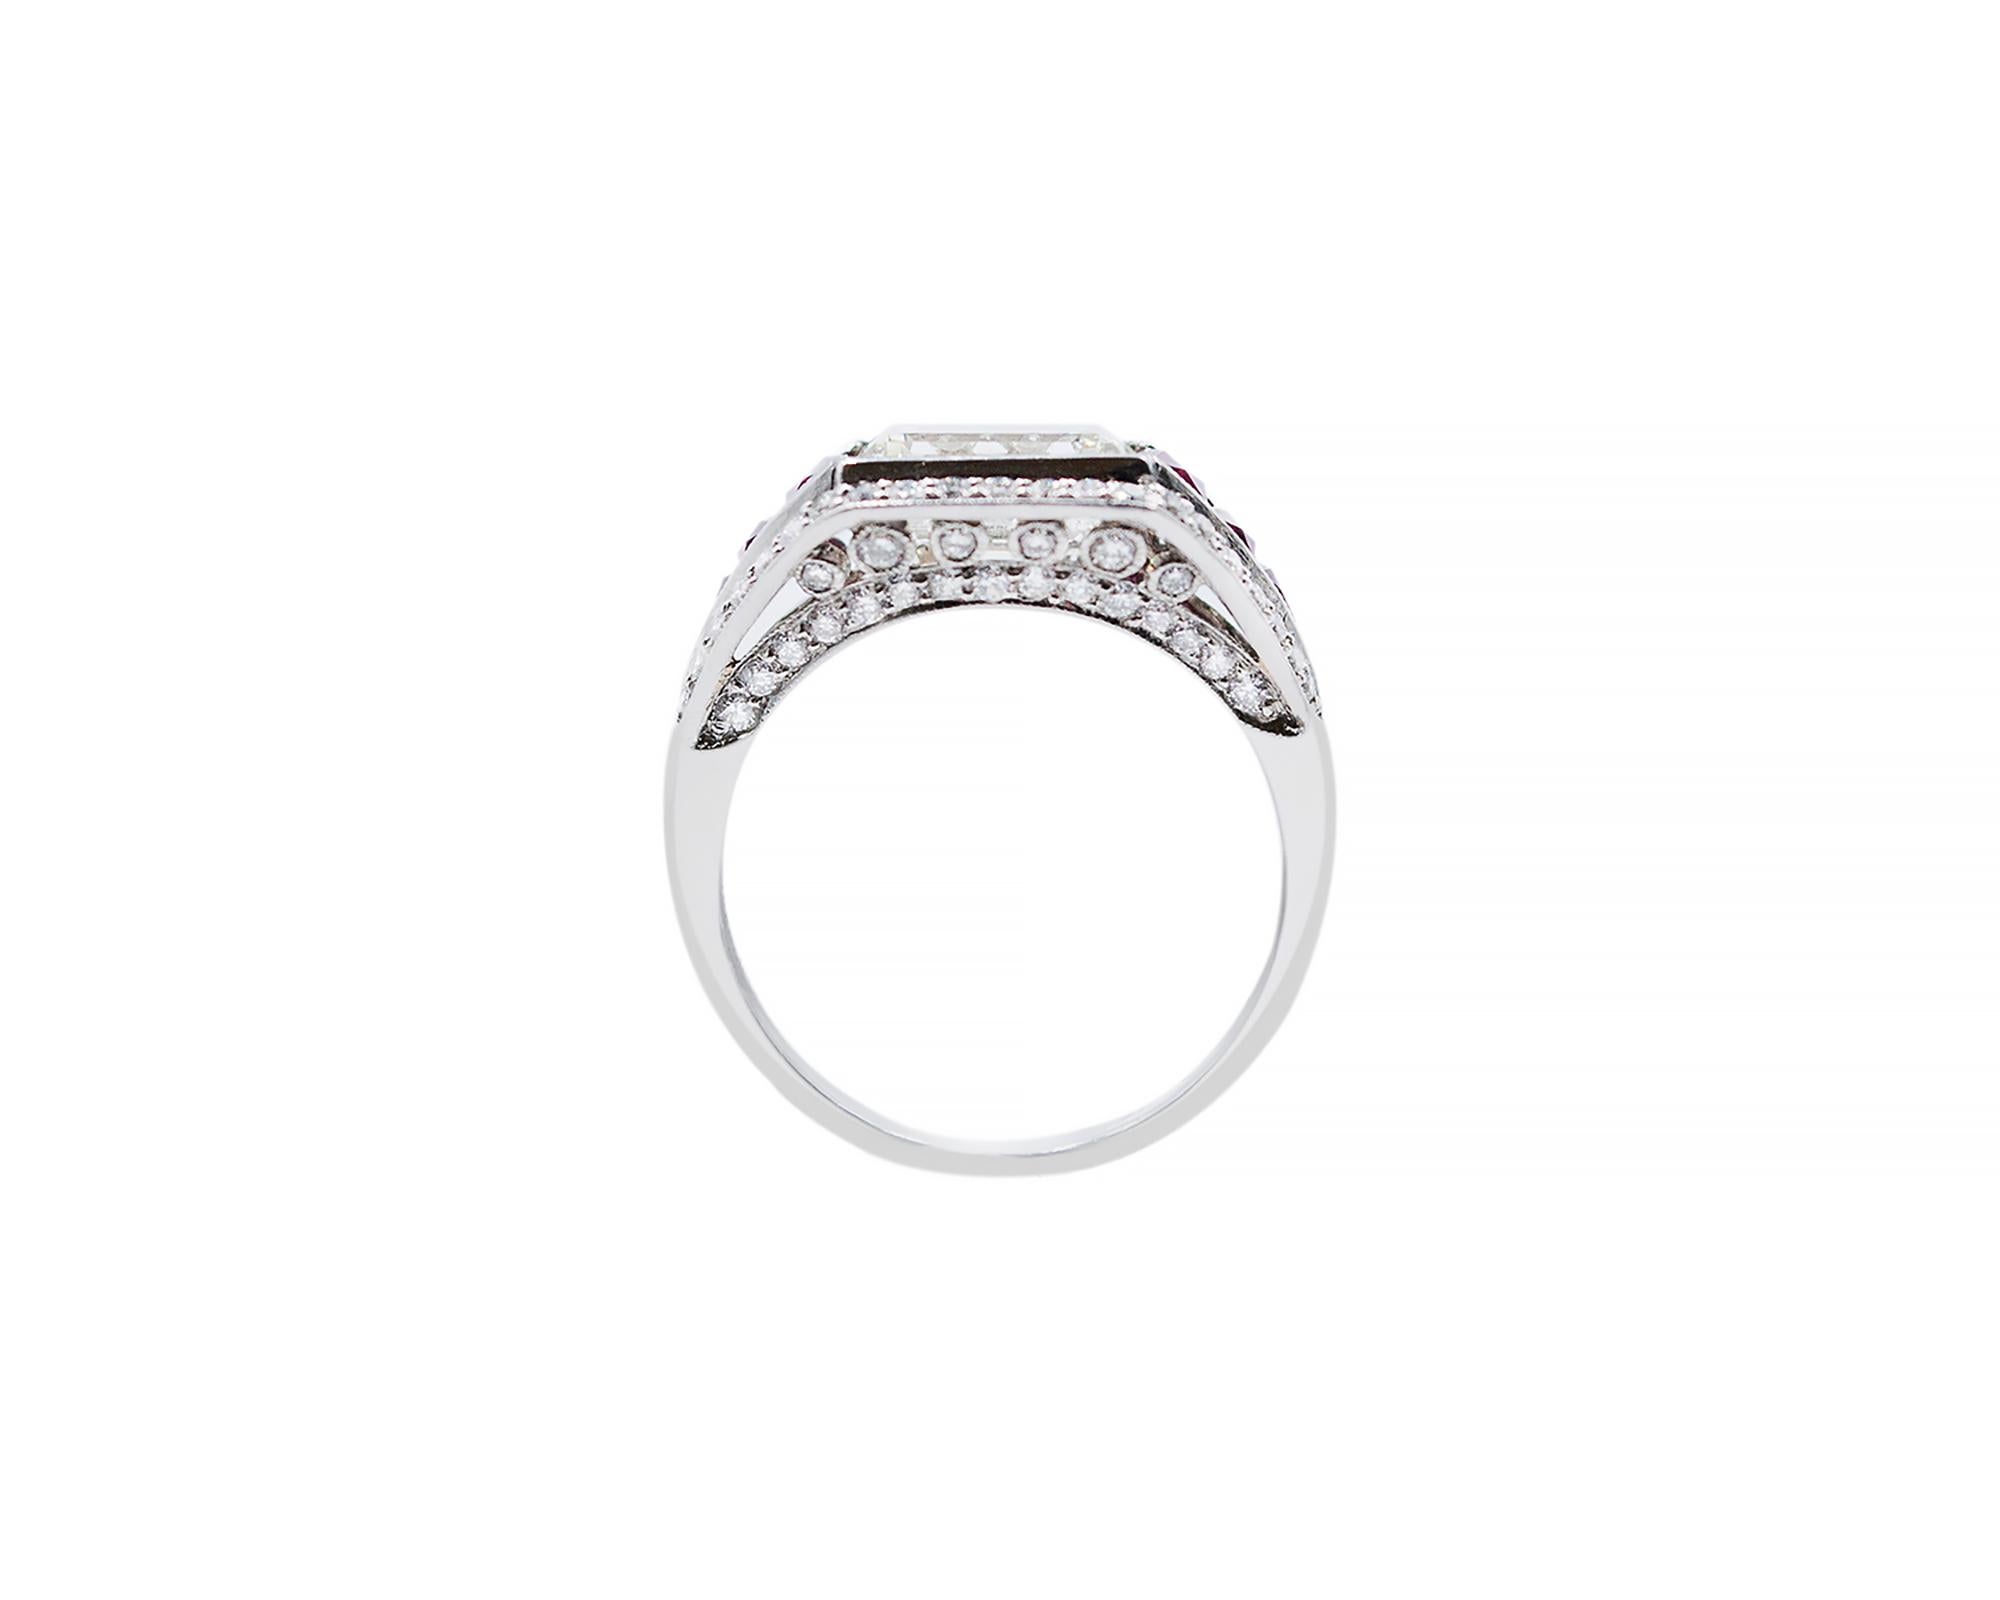 Women's Diamond Ruby Platinum Cocktail Ring For Sale